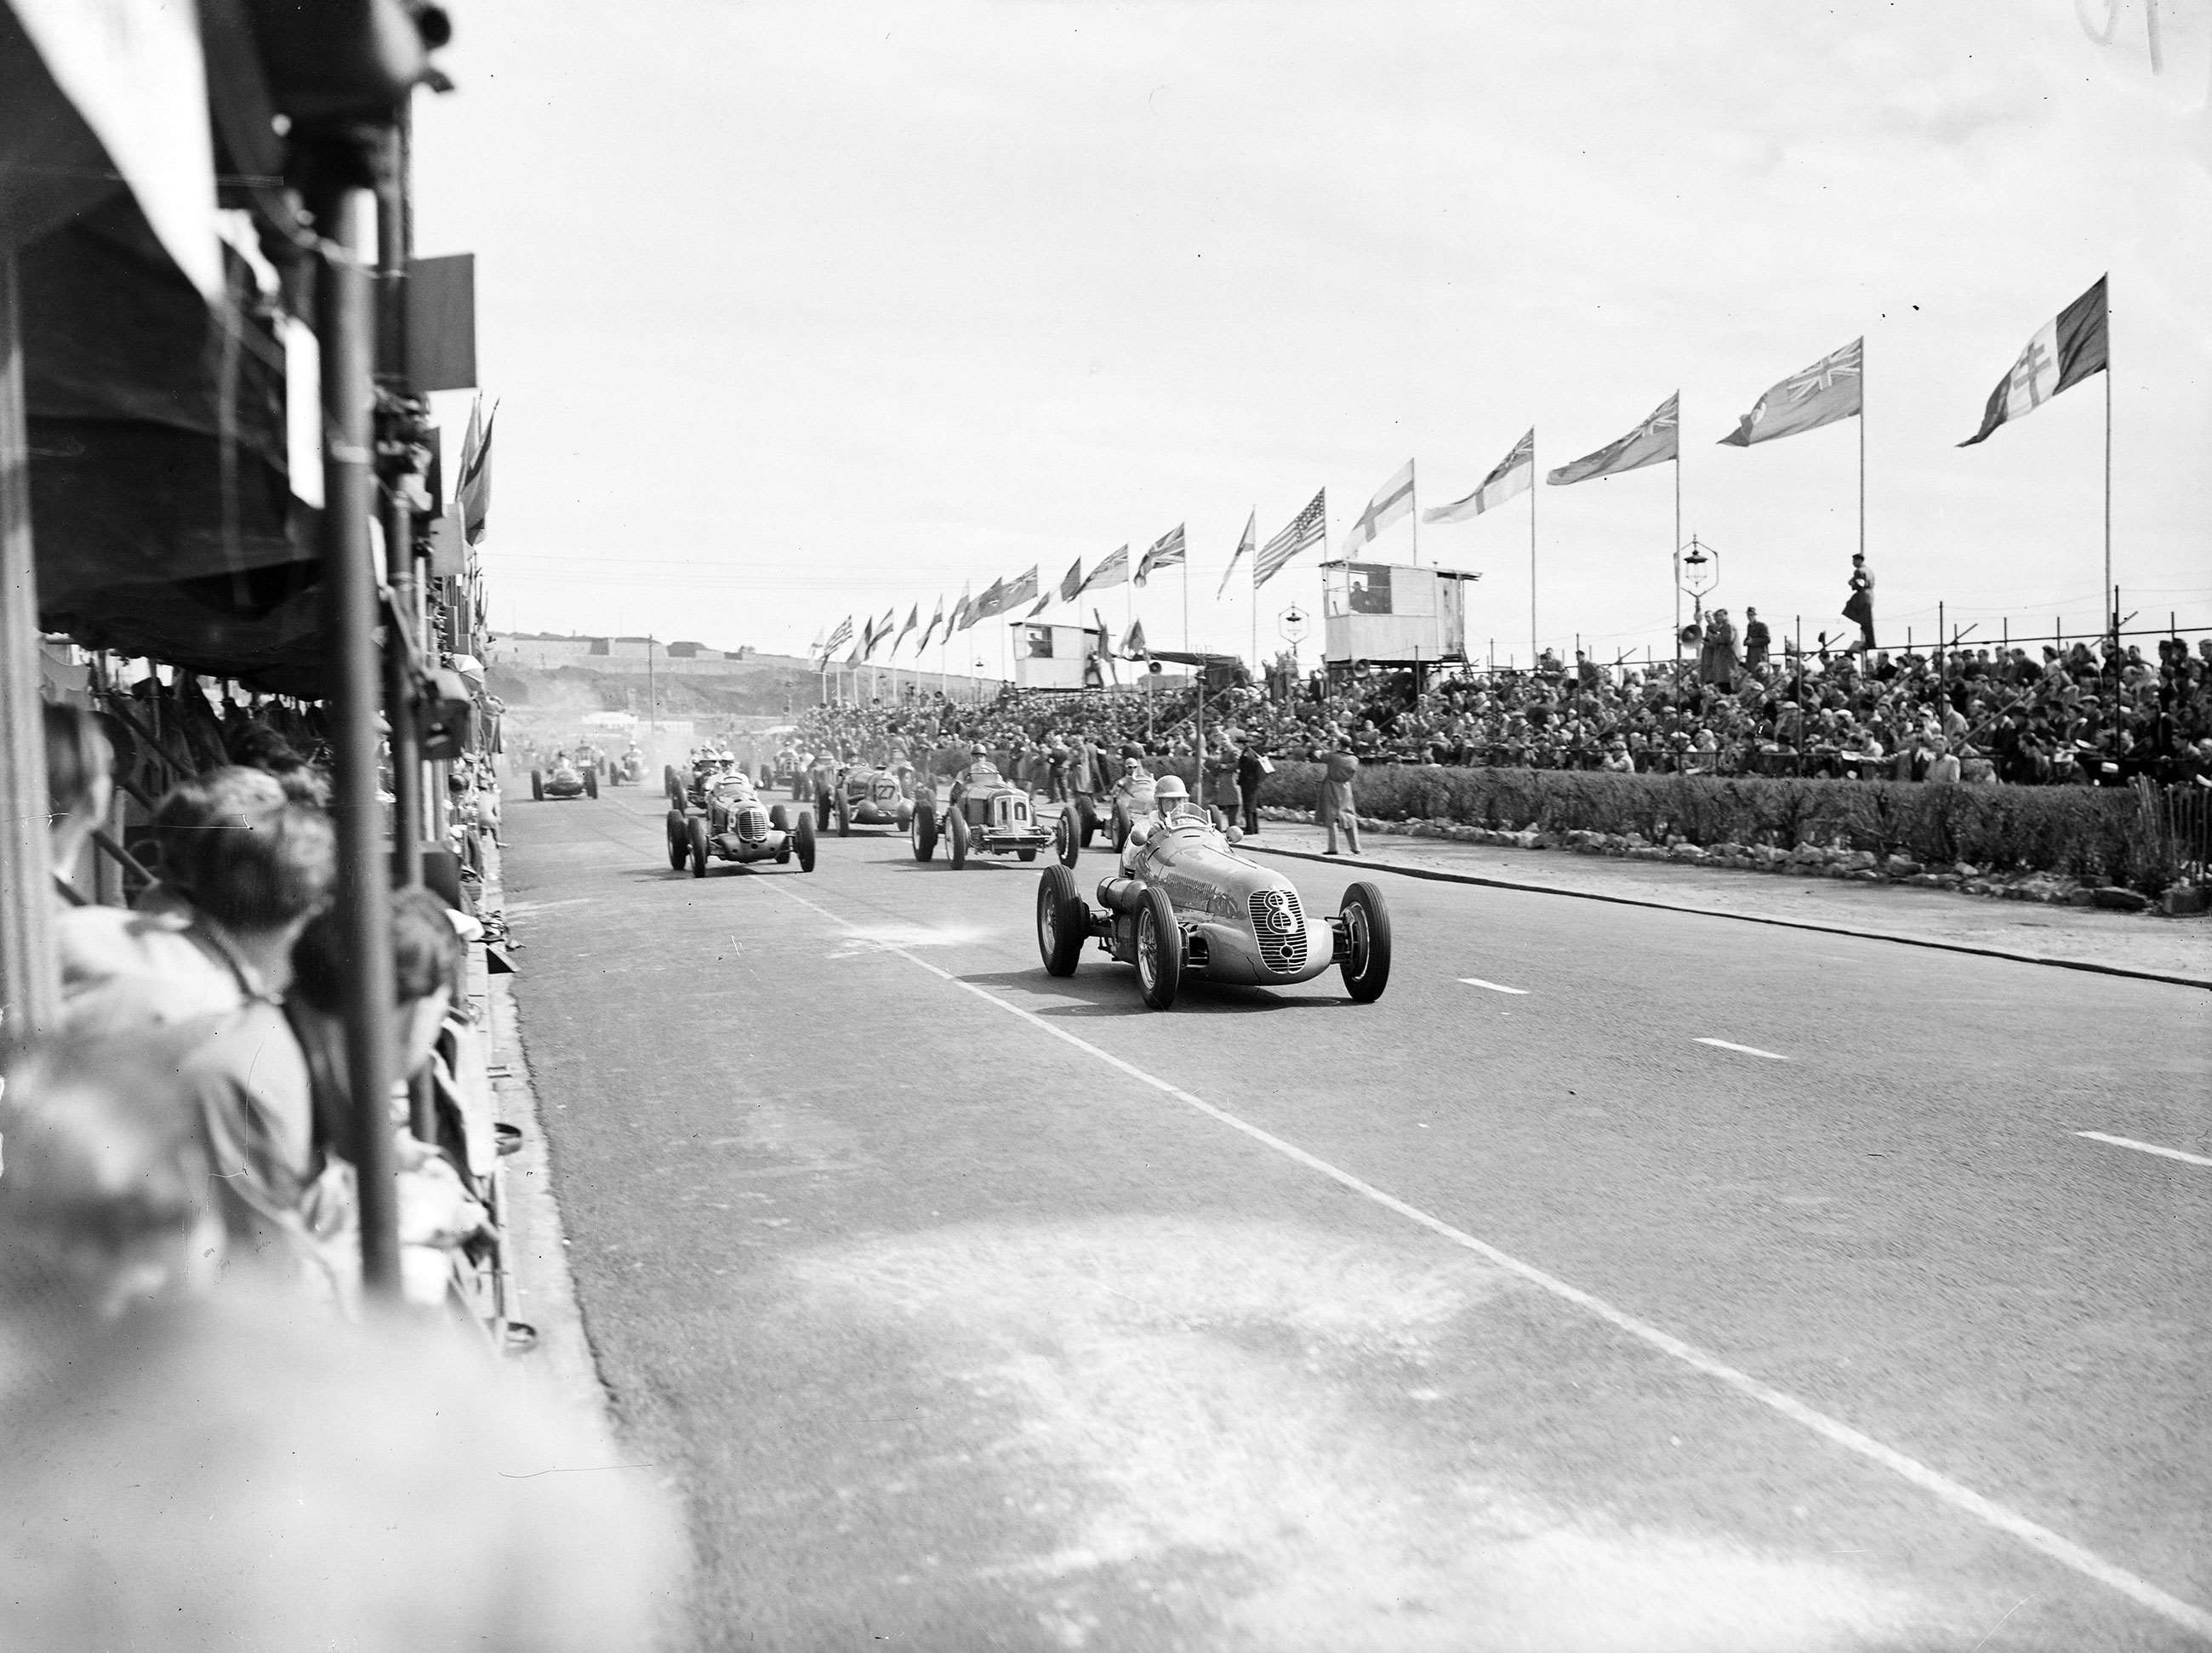 The start of the 1948 Jersey International Road Race. Red Parnell leads away in his Maserati 4CL, second is George Abecassis in a Maserati 6CM, third is Bob Gerard in an ERA B, followed by Prince Bira and Gordon Bennett.